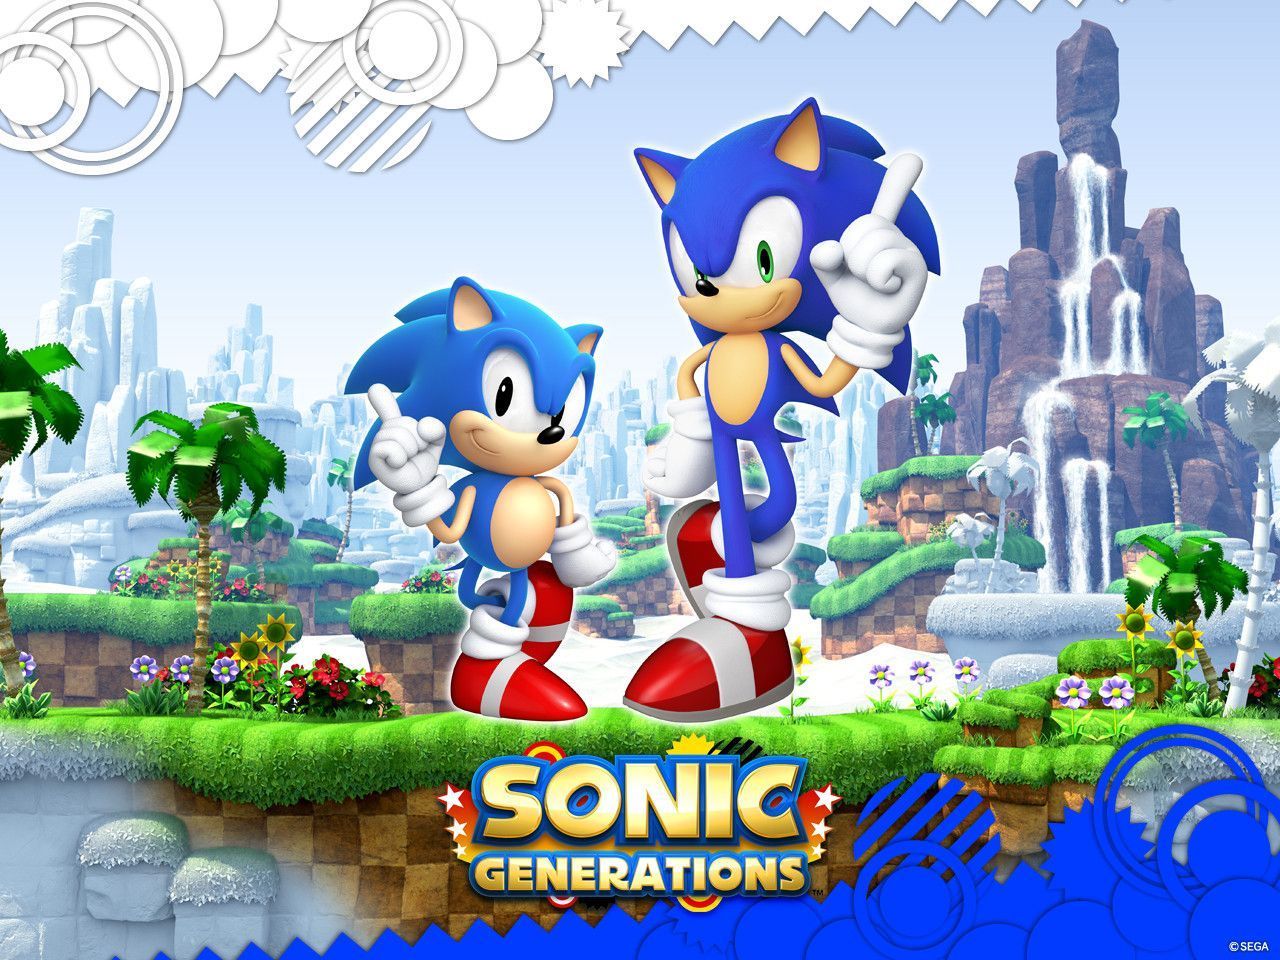 ULTIMATE SONIC GENERATIONS WALLPAPER by SONICX2011 on DeviantArt